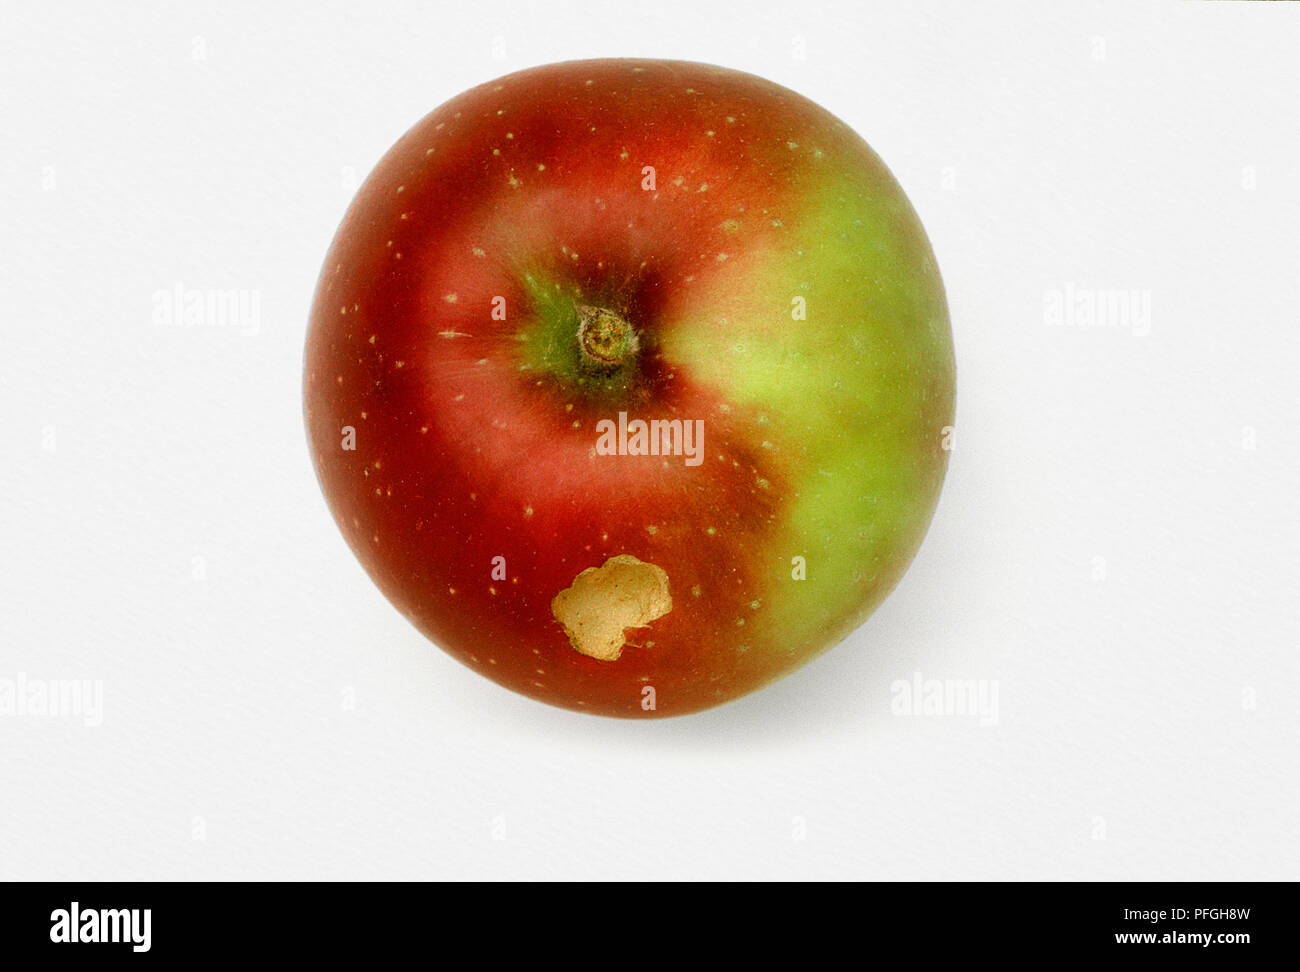 Apple with peck mark in skin Stock Photo